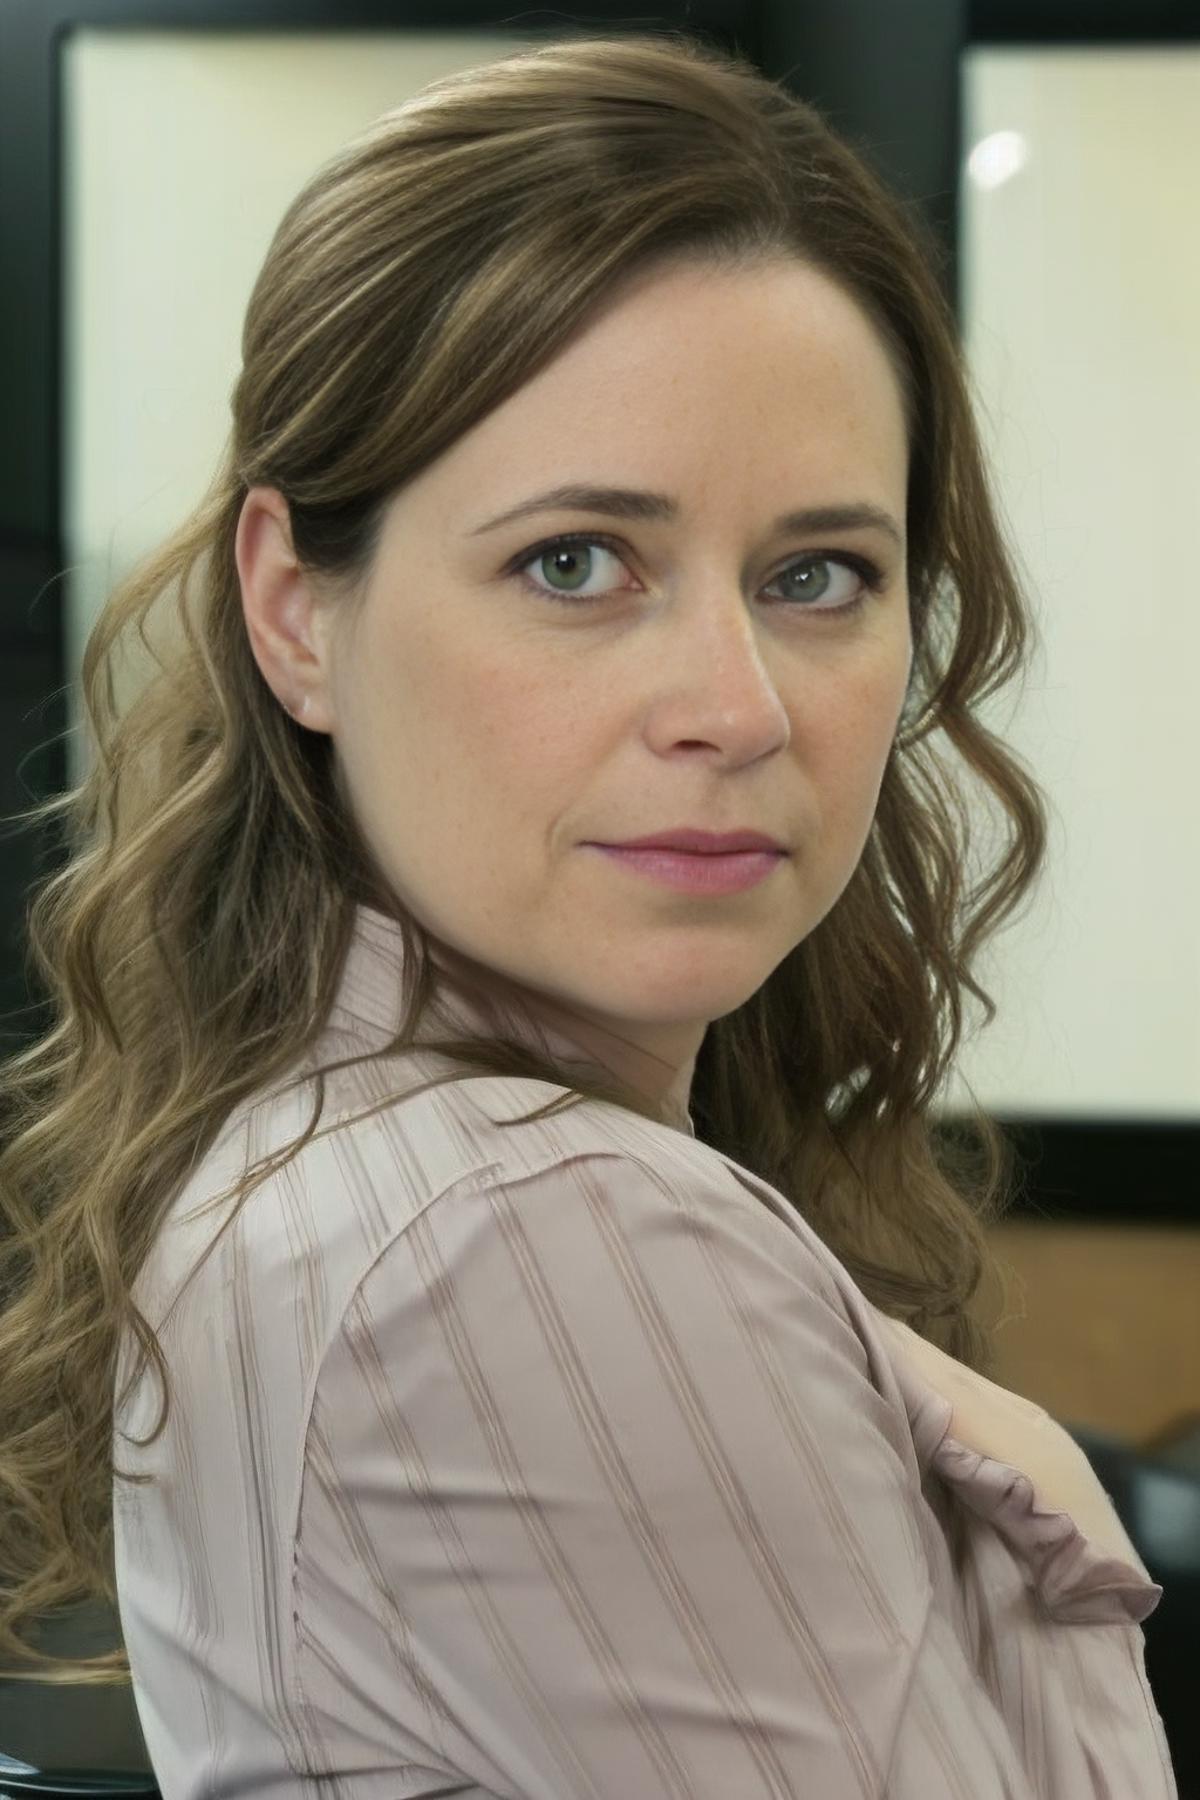 Pam Beesly (Jenna Fischer) image by diffusional